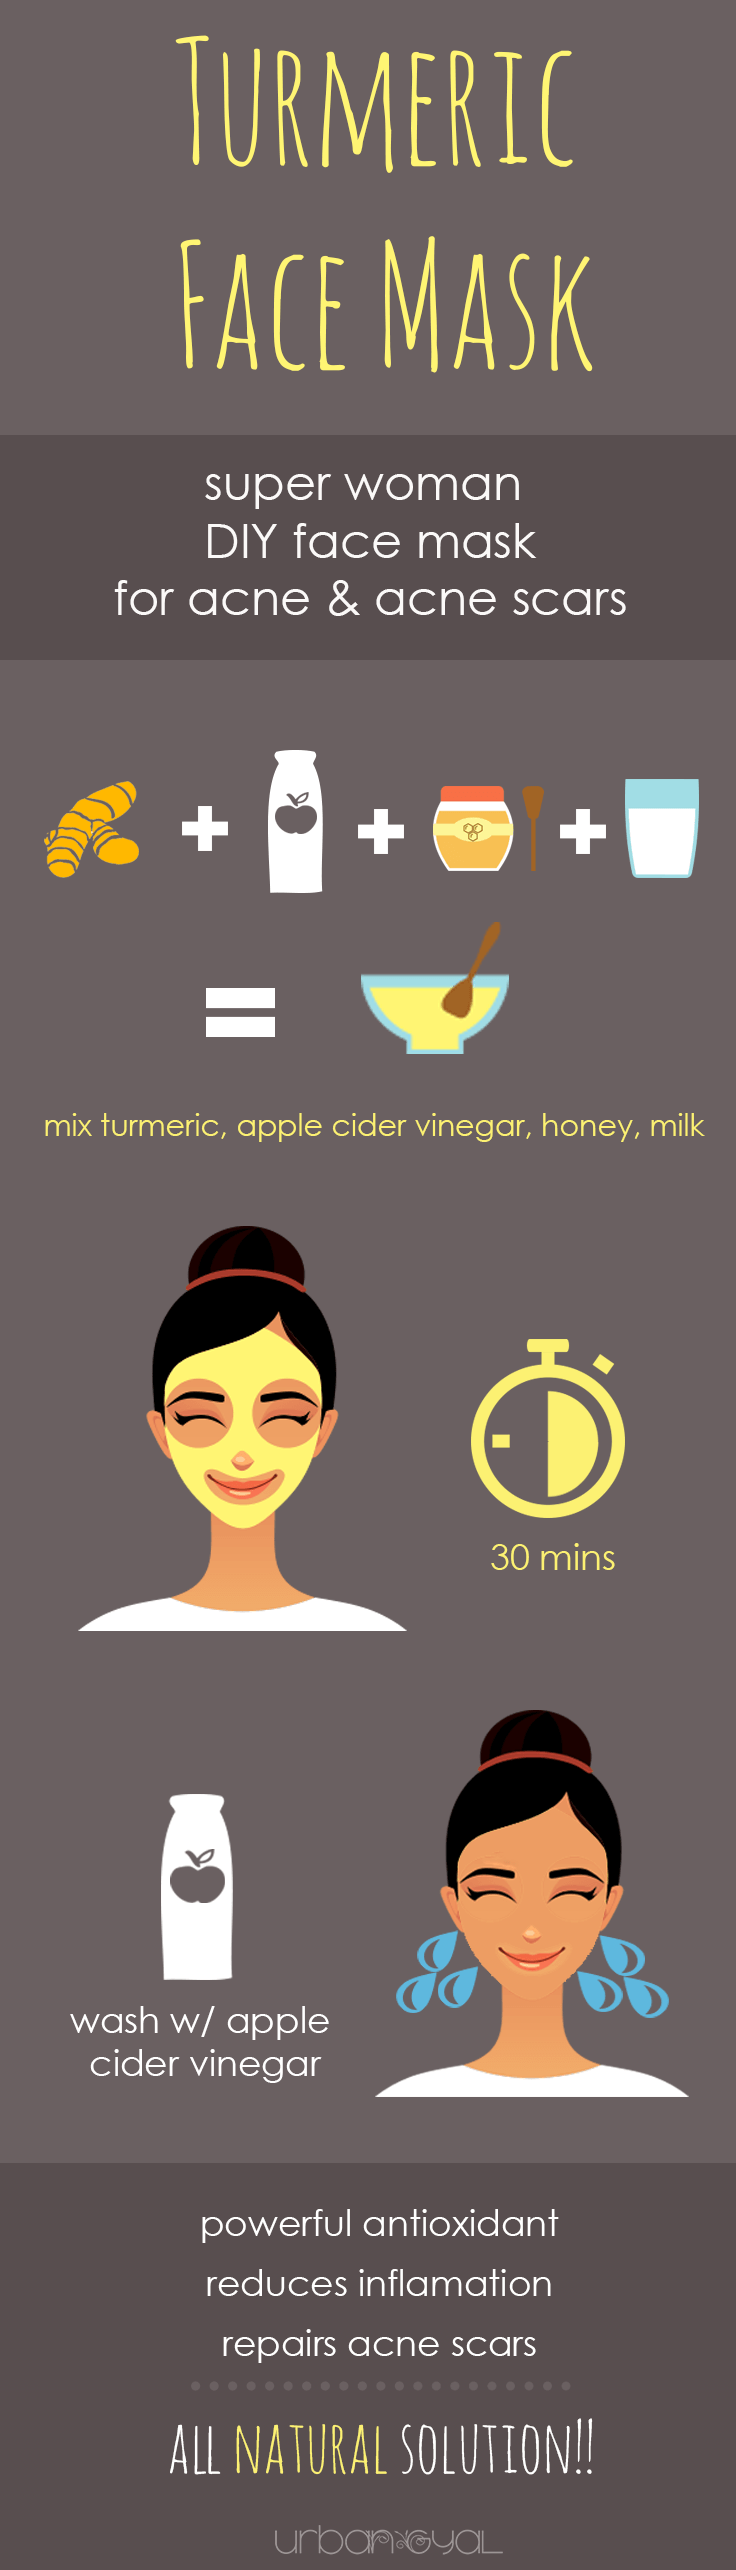 The Superwomen Turmeric Face Mask Recipe to Get Rid of Acne Naturally